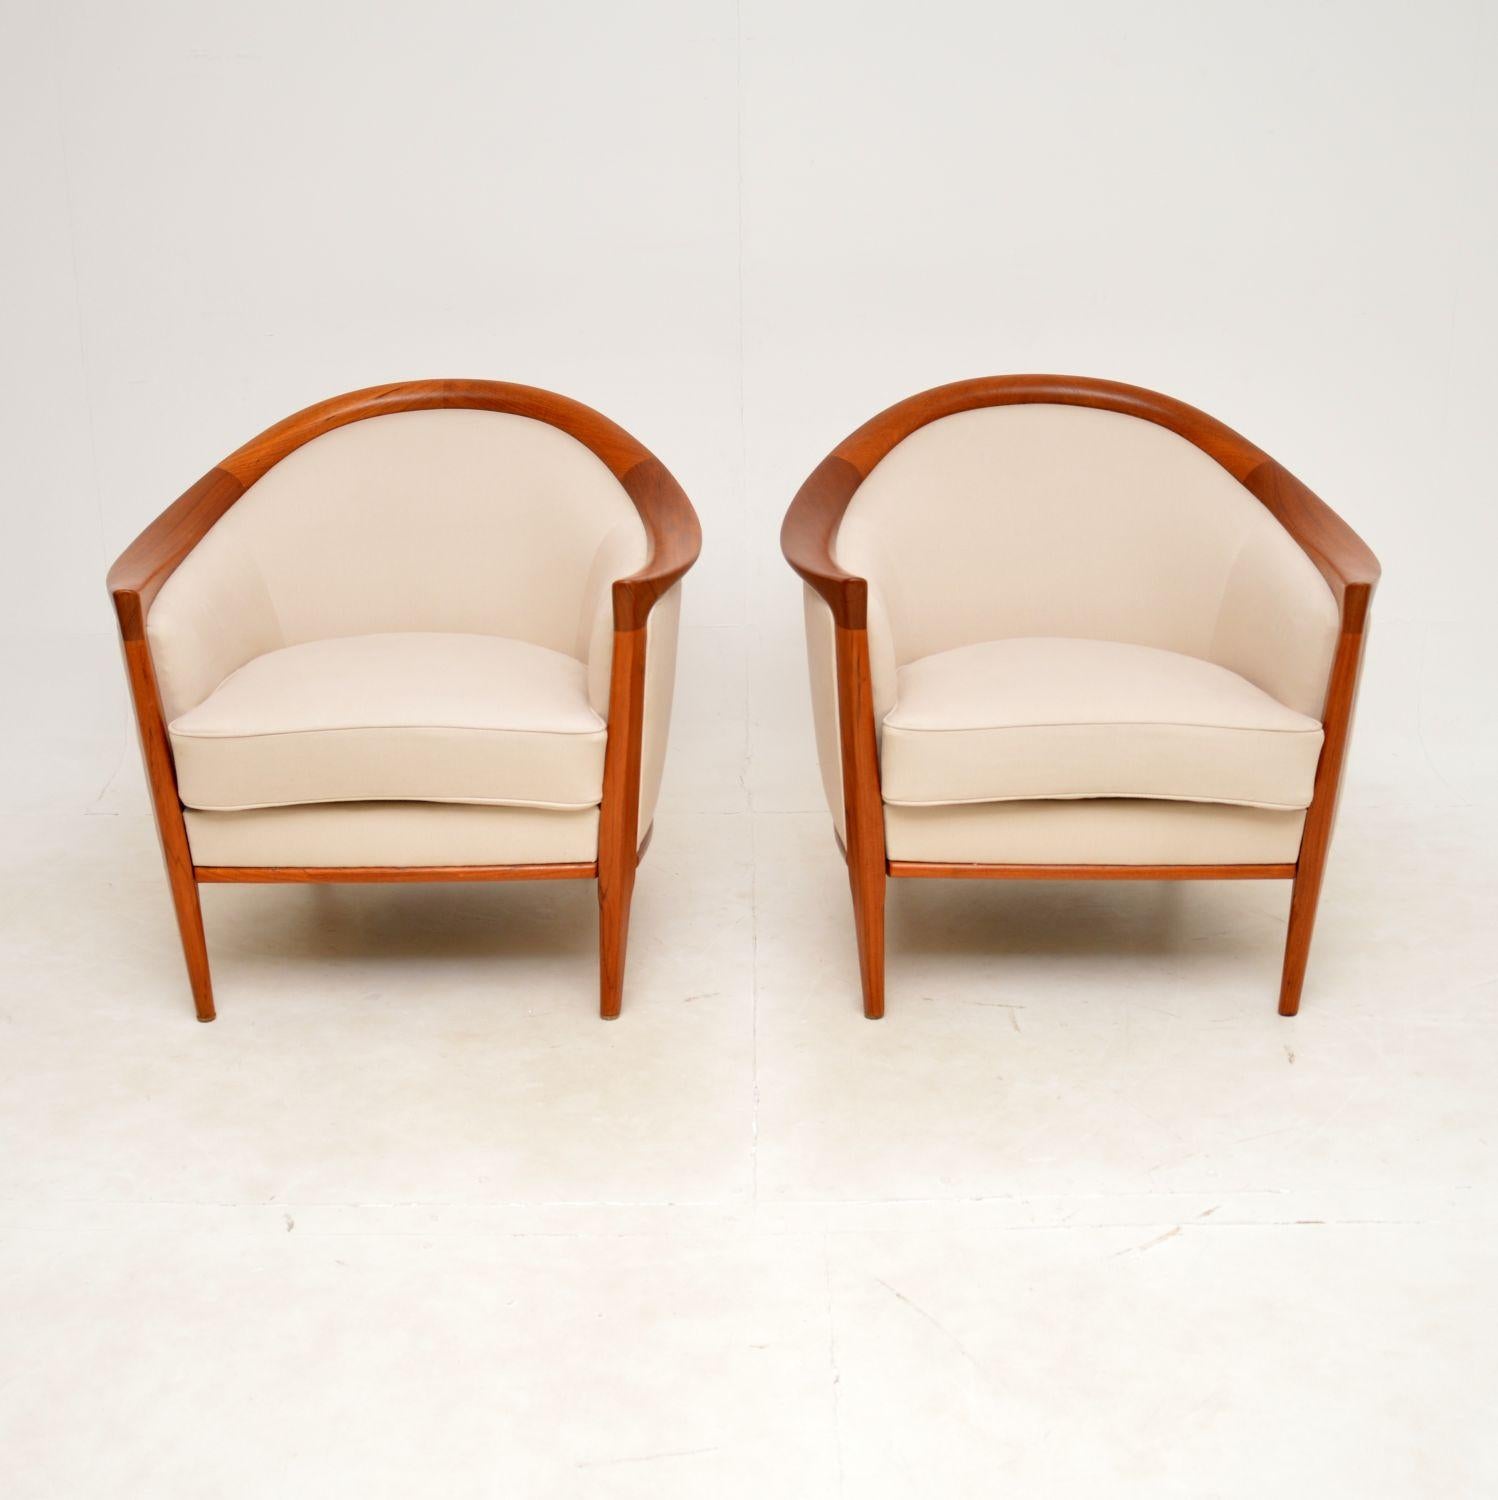 An absolutely stunning pair of vintage Swedish armchairs in teak. They were designed by Bertil Fridhagen and were made by Broderna Andersson in the 1960s.

The quality is outstanding, the solid teak frames have beautiful, sweeping curves. They are